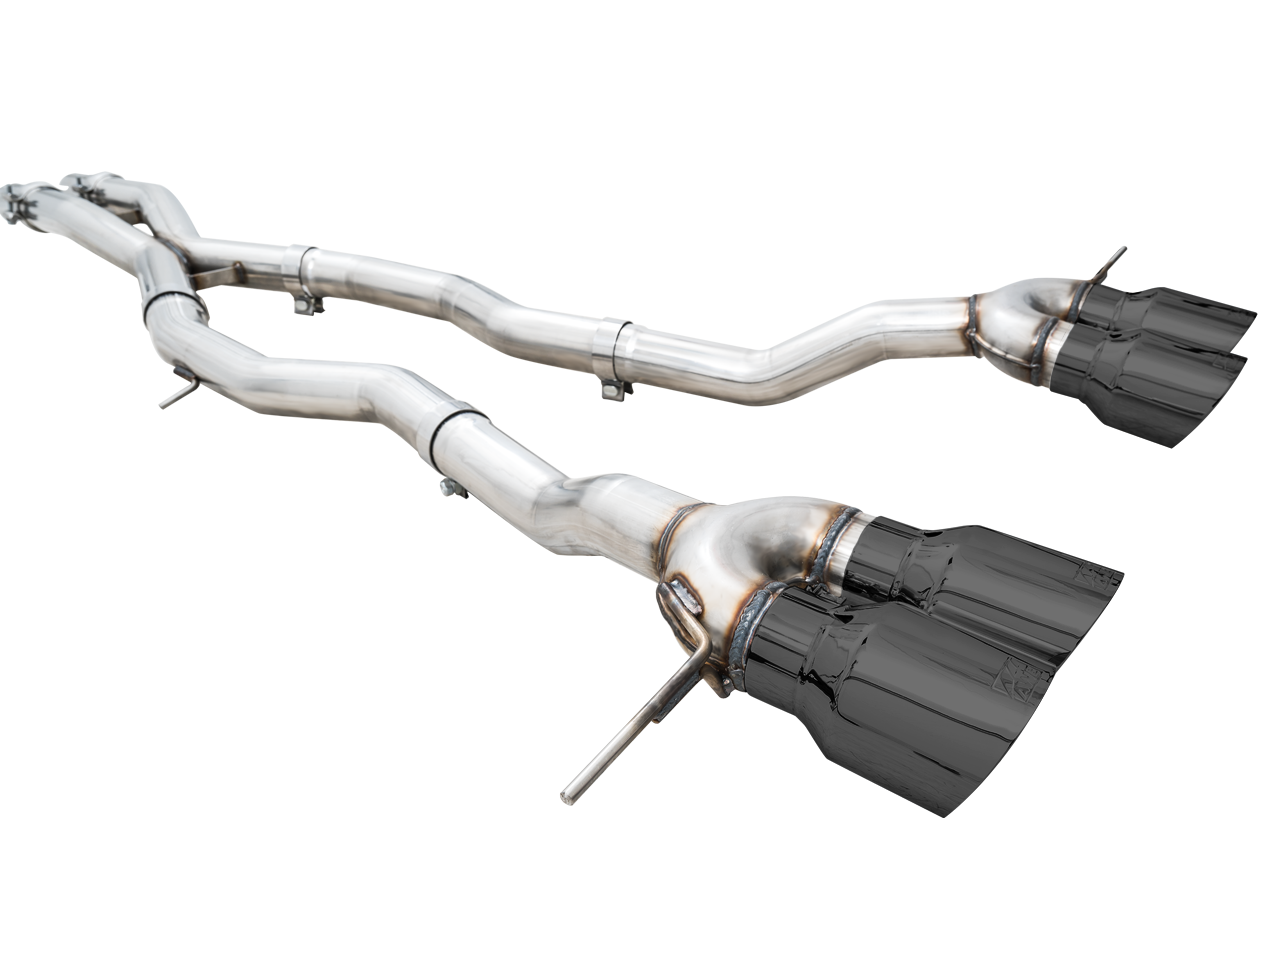 AWE Track Edition Catback Exhaust BMW M3/M4 G80/G82/G83 S58